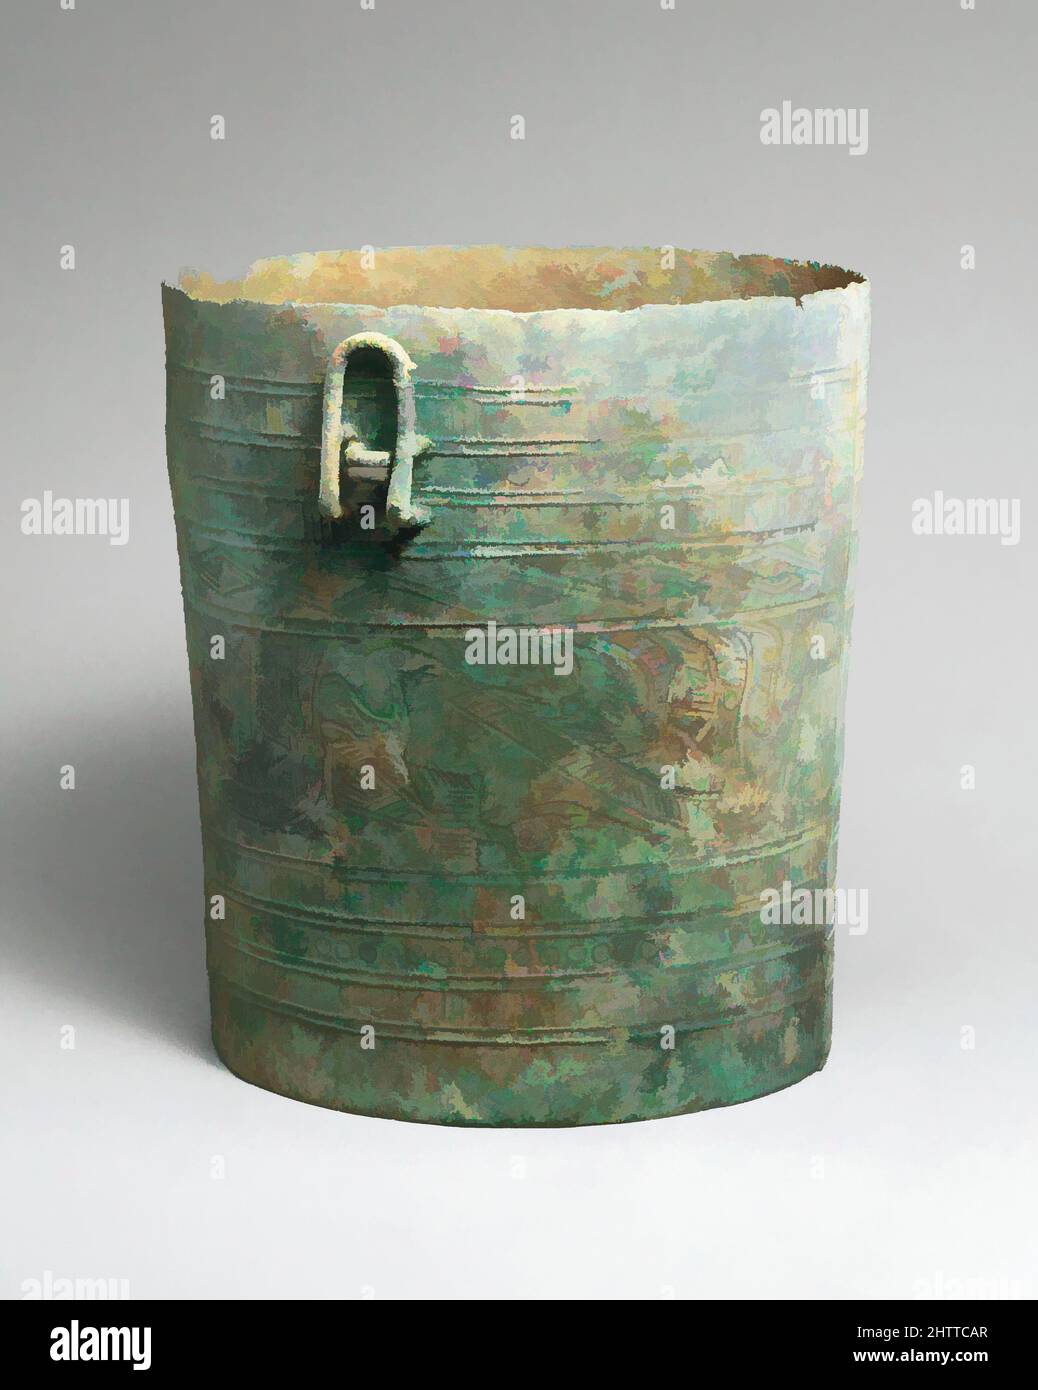 Art inspired by Situla with Design of Boats, Bronze and Iron Age period, Dongson culture, ca. 500 B.C.–A.D. 300, Vietnam, Bronze, H. 8 1/4 in. (21 cm), Metalwork, Axes, situlae, and drums play an important role in Vietnam's Dongson culture named after a site located on the coastline to, Classic works modernized by Artotop with a splash of modernity. Shapes, color and value, eye-catching visual impact on art. Emotions through freedom of artworks in a contemporary way. A timeless message pursuing a wildly creative new direction. Artists turning to the digital medium and creating the Artotop NFT Stock Photo